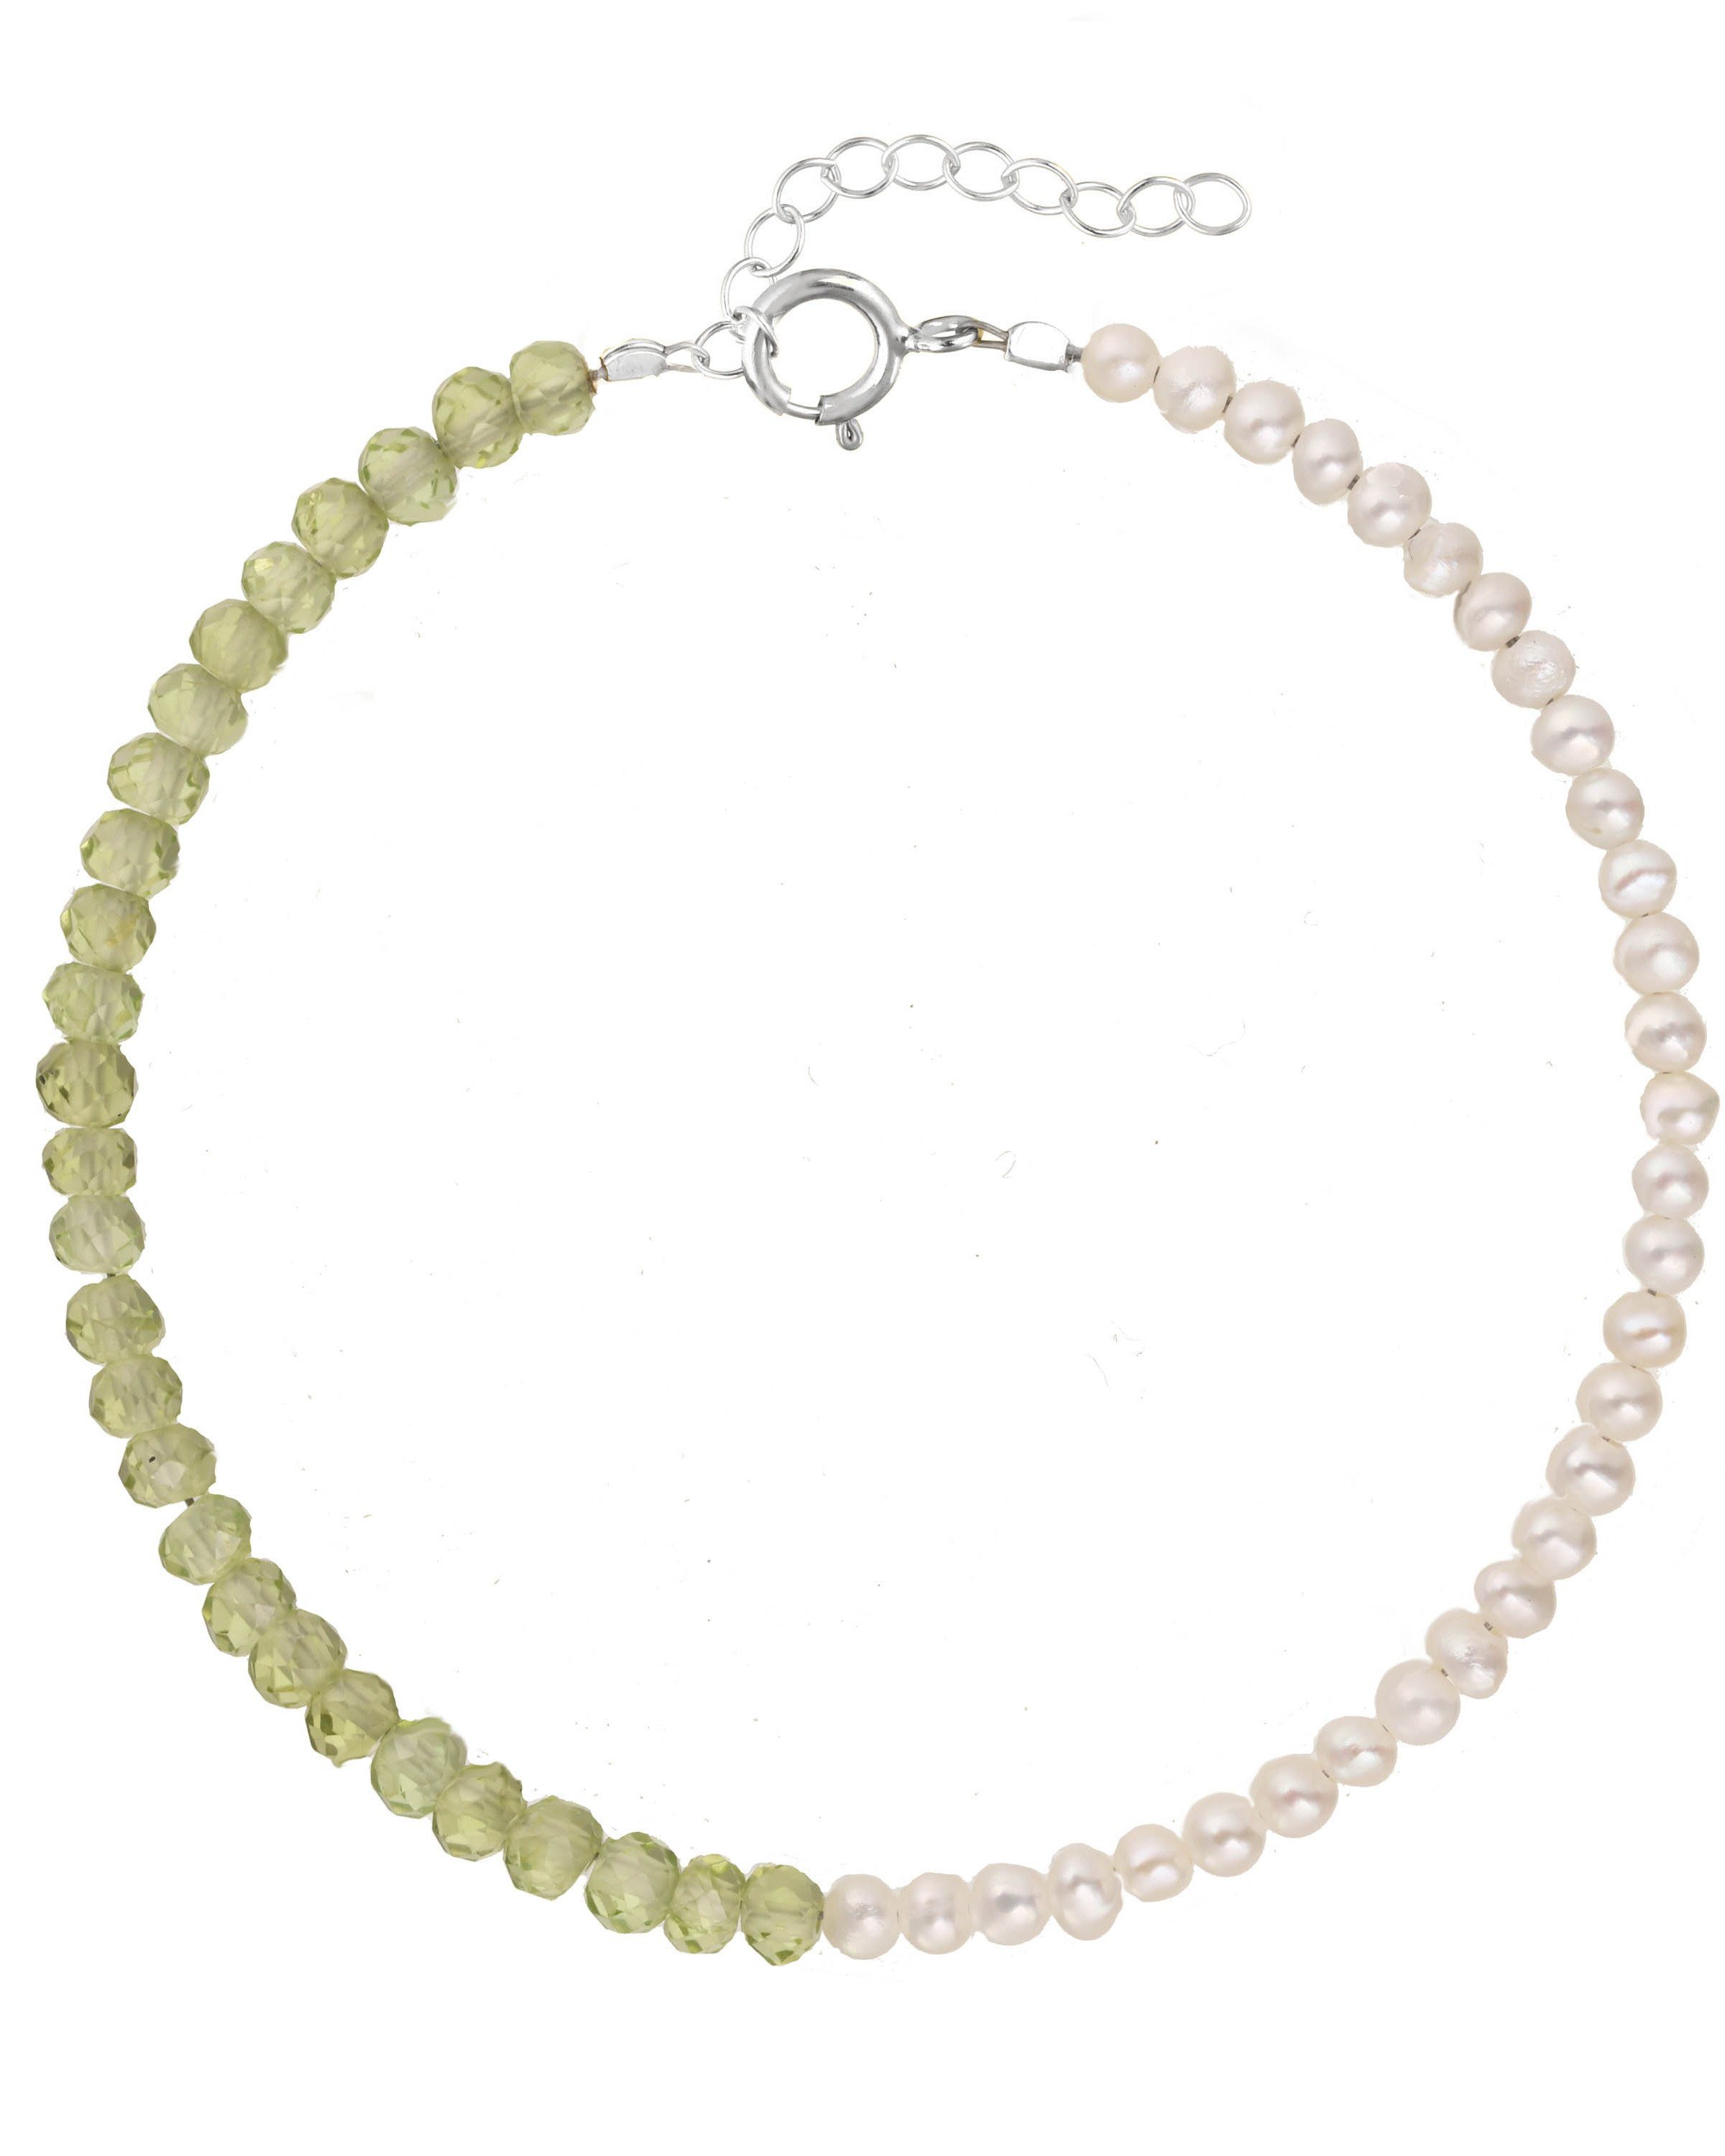 Elo Bracelet by KOZAKH. A 6 to 7 inch adjustable length bracelet, crafted in Sterling Silver. Half of the bracelet strand features 3.5mm Freshwater Pearls and 3.5mm Faceted Peridot beads on the other half.